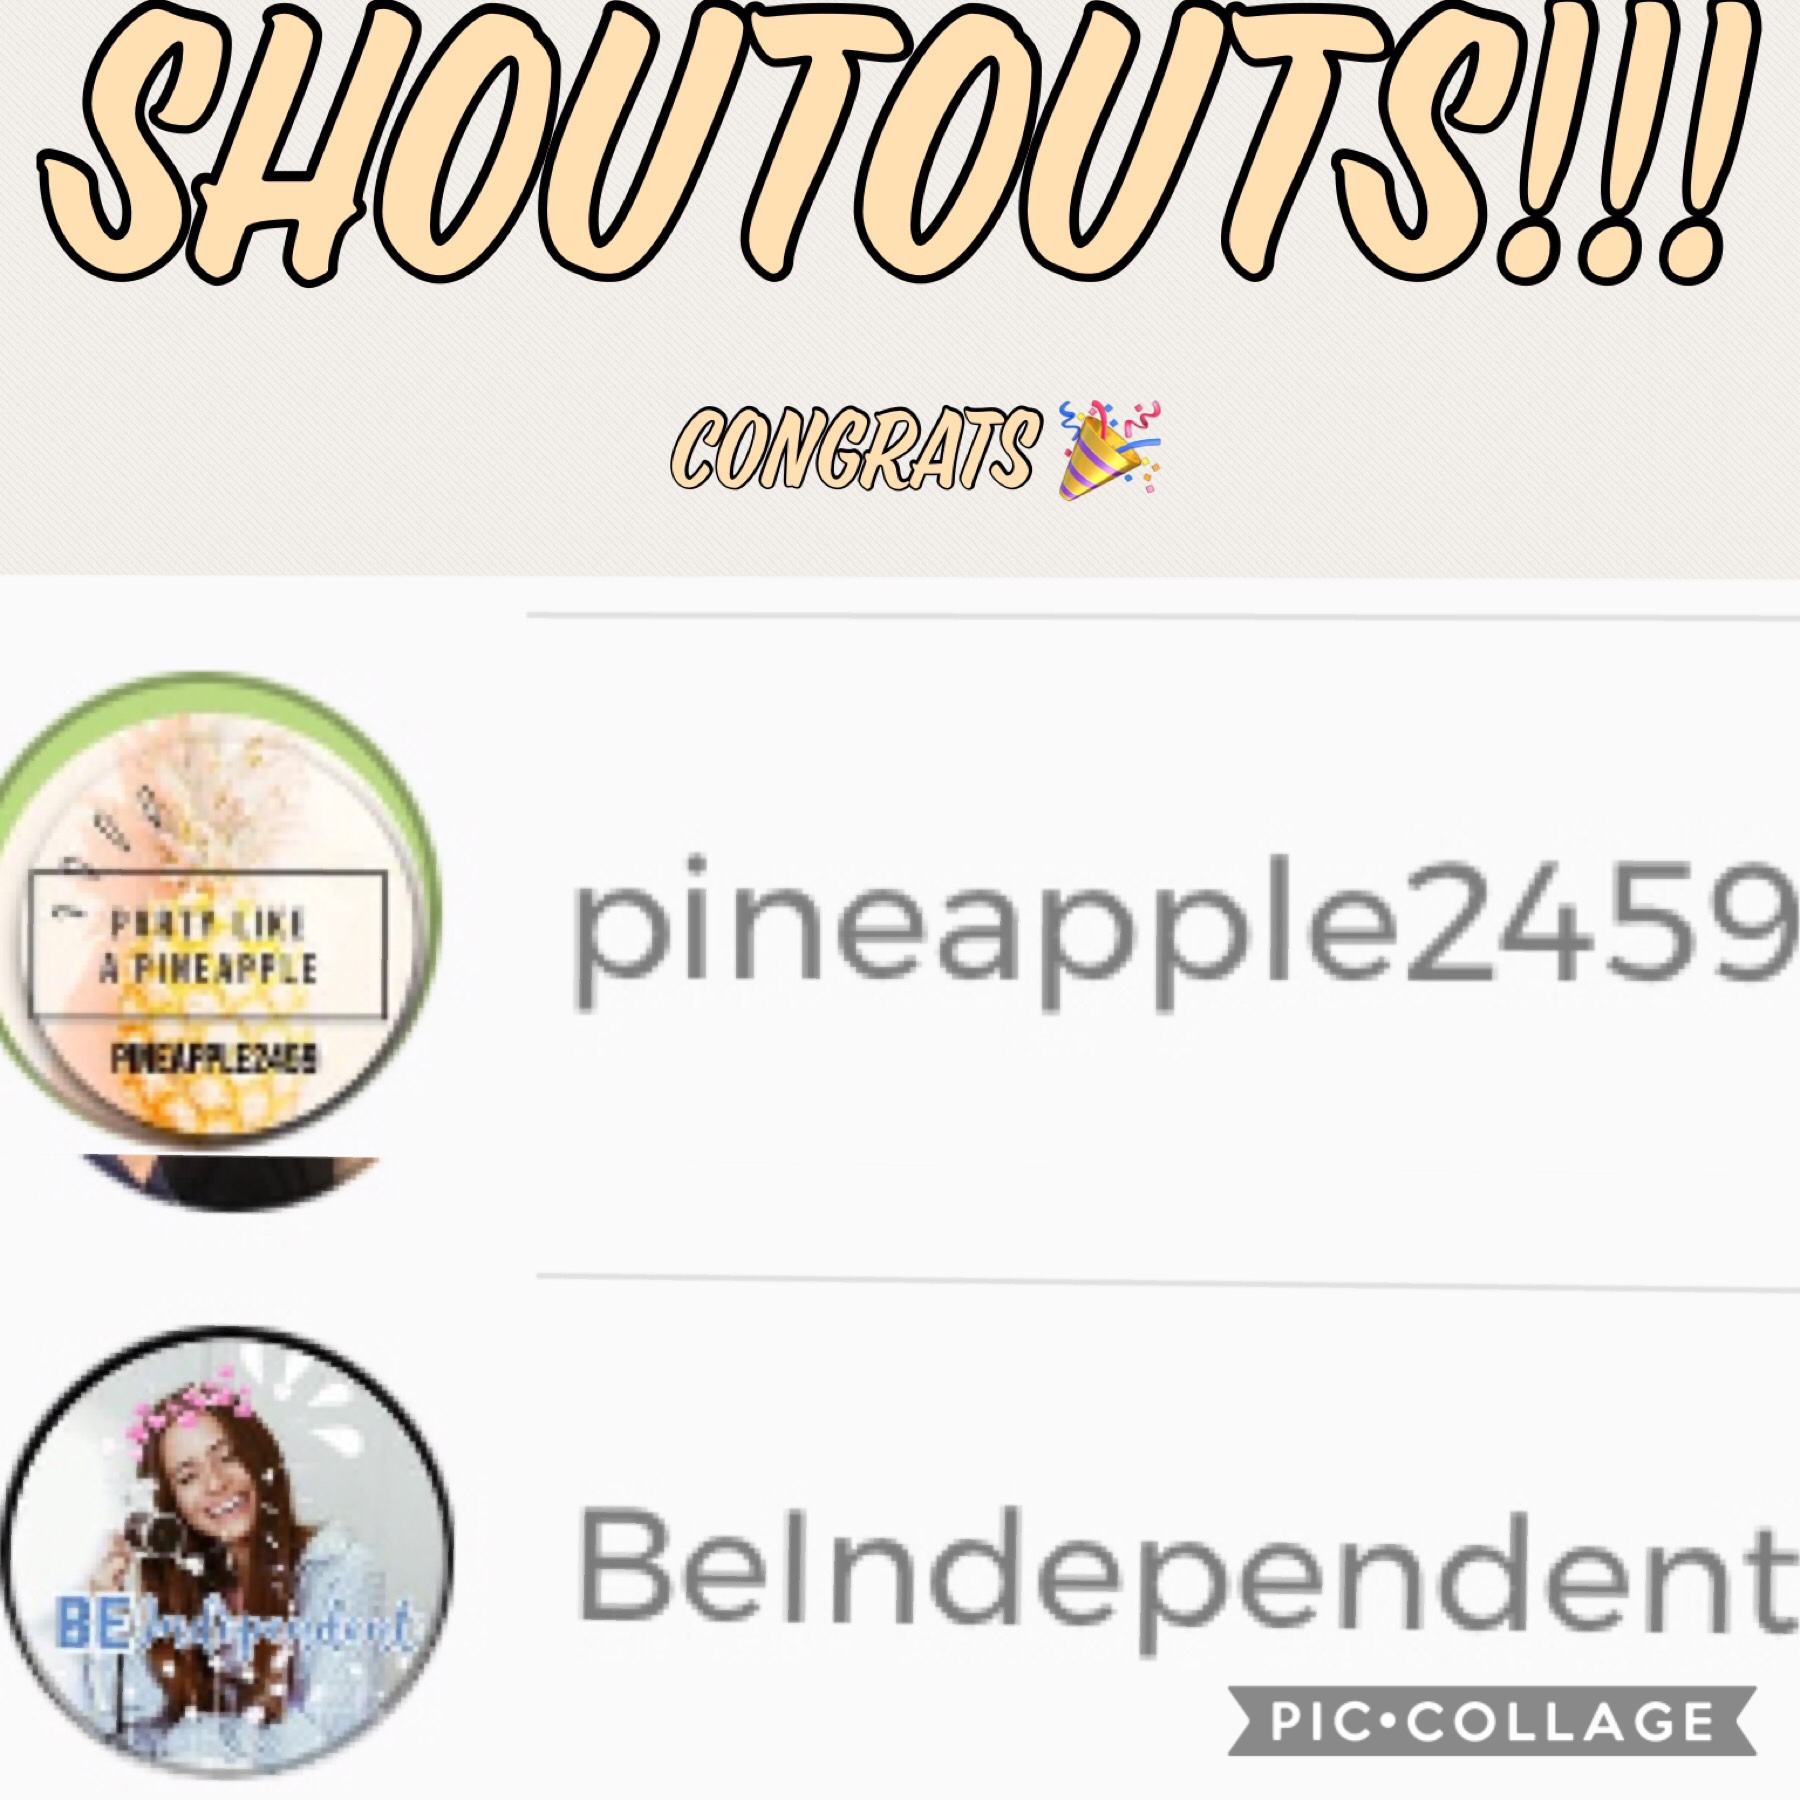 SHOUTOUTS FOR PINEAPPLE2459 AND BEINDEPENDENT